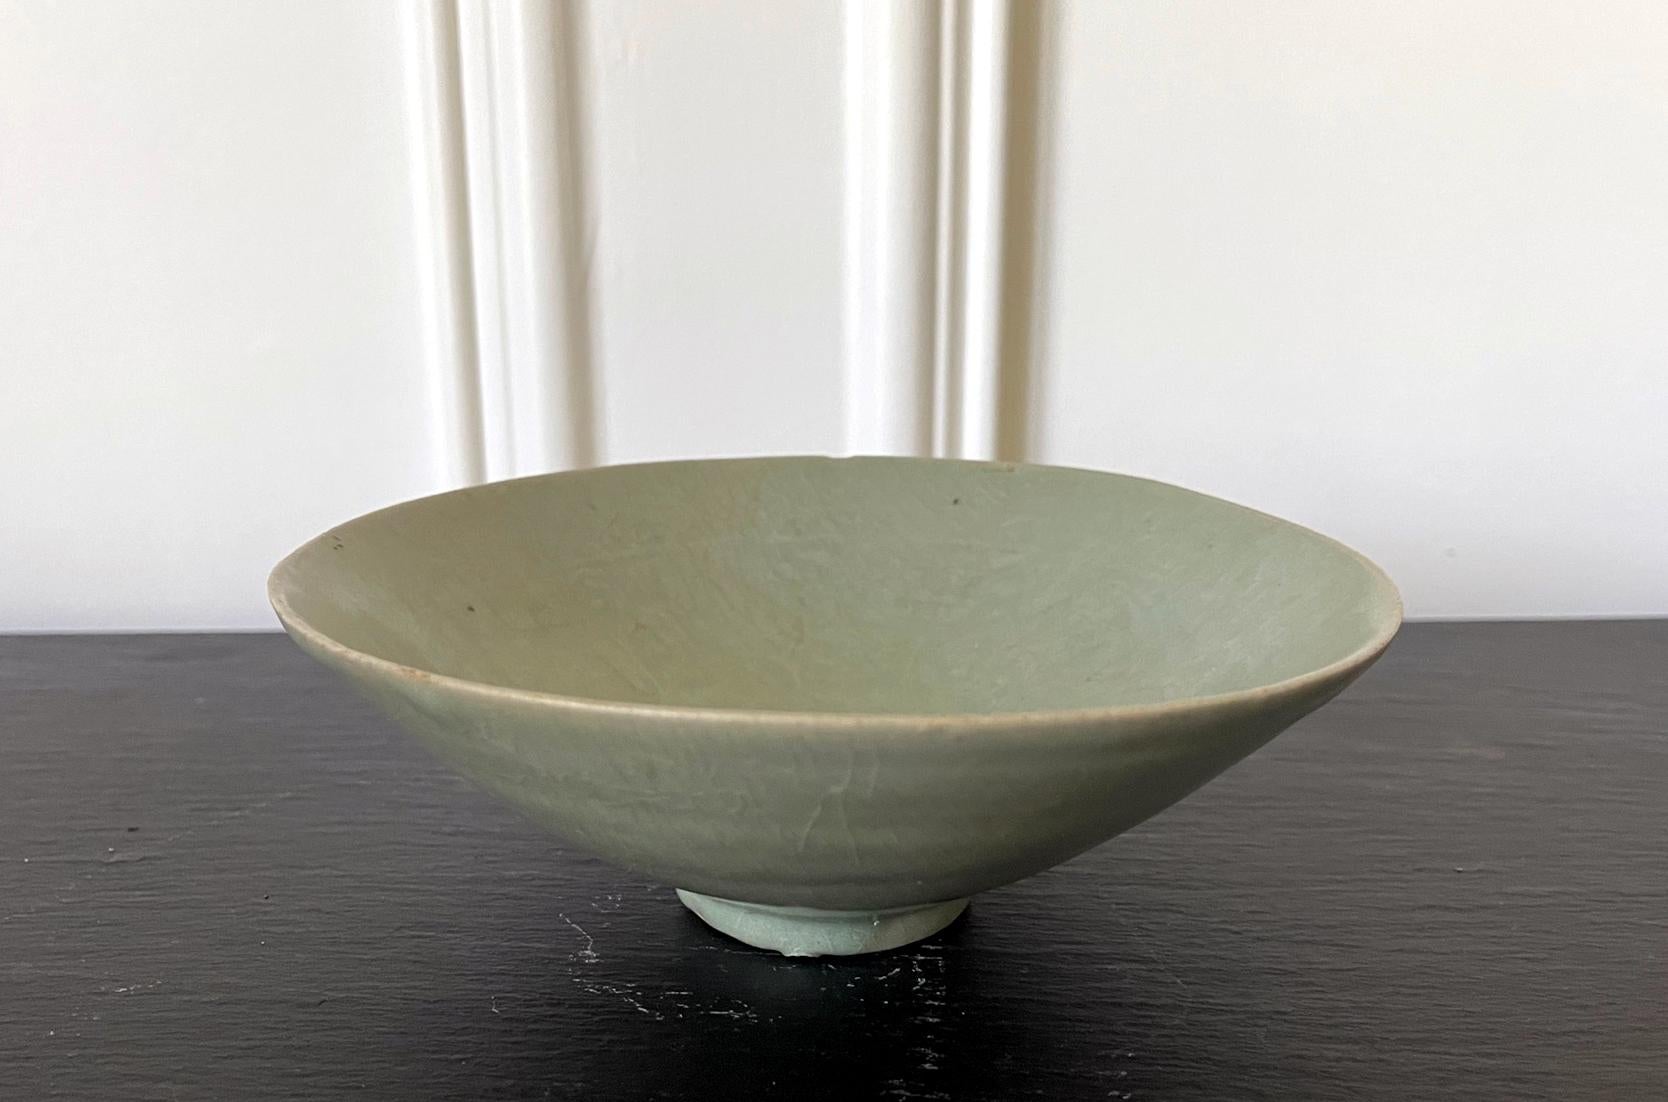 An antique Korean ceramic tea bowl with celadon glaze from Goryeo dynasty, circa 12th century. The thin-walled stoneware bowl was potted delicately with a subtle irregularity in shape. Of an elegant conical form, the bowl rises on a small ring base